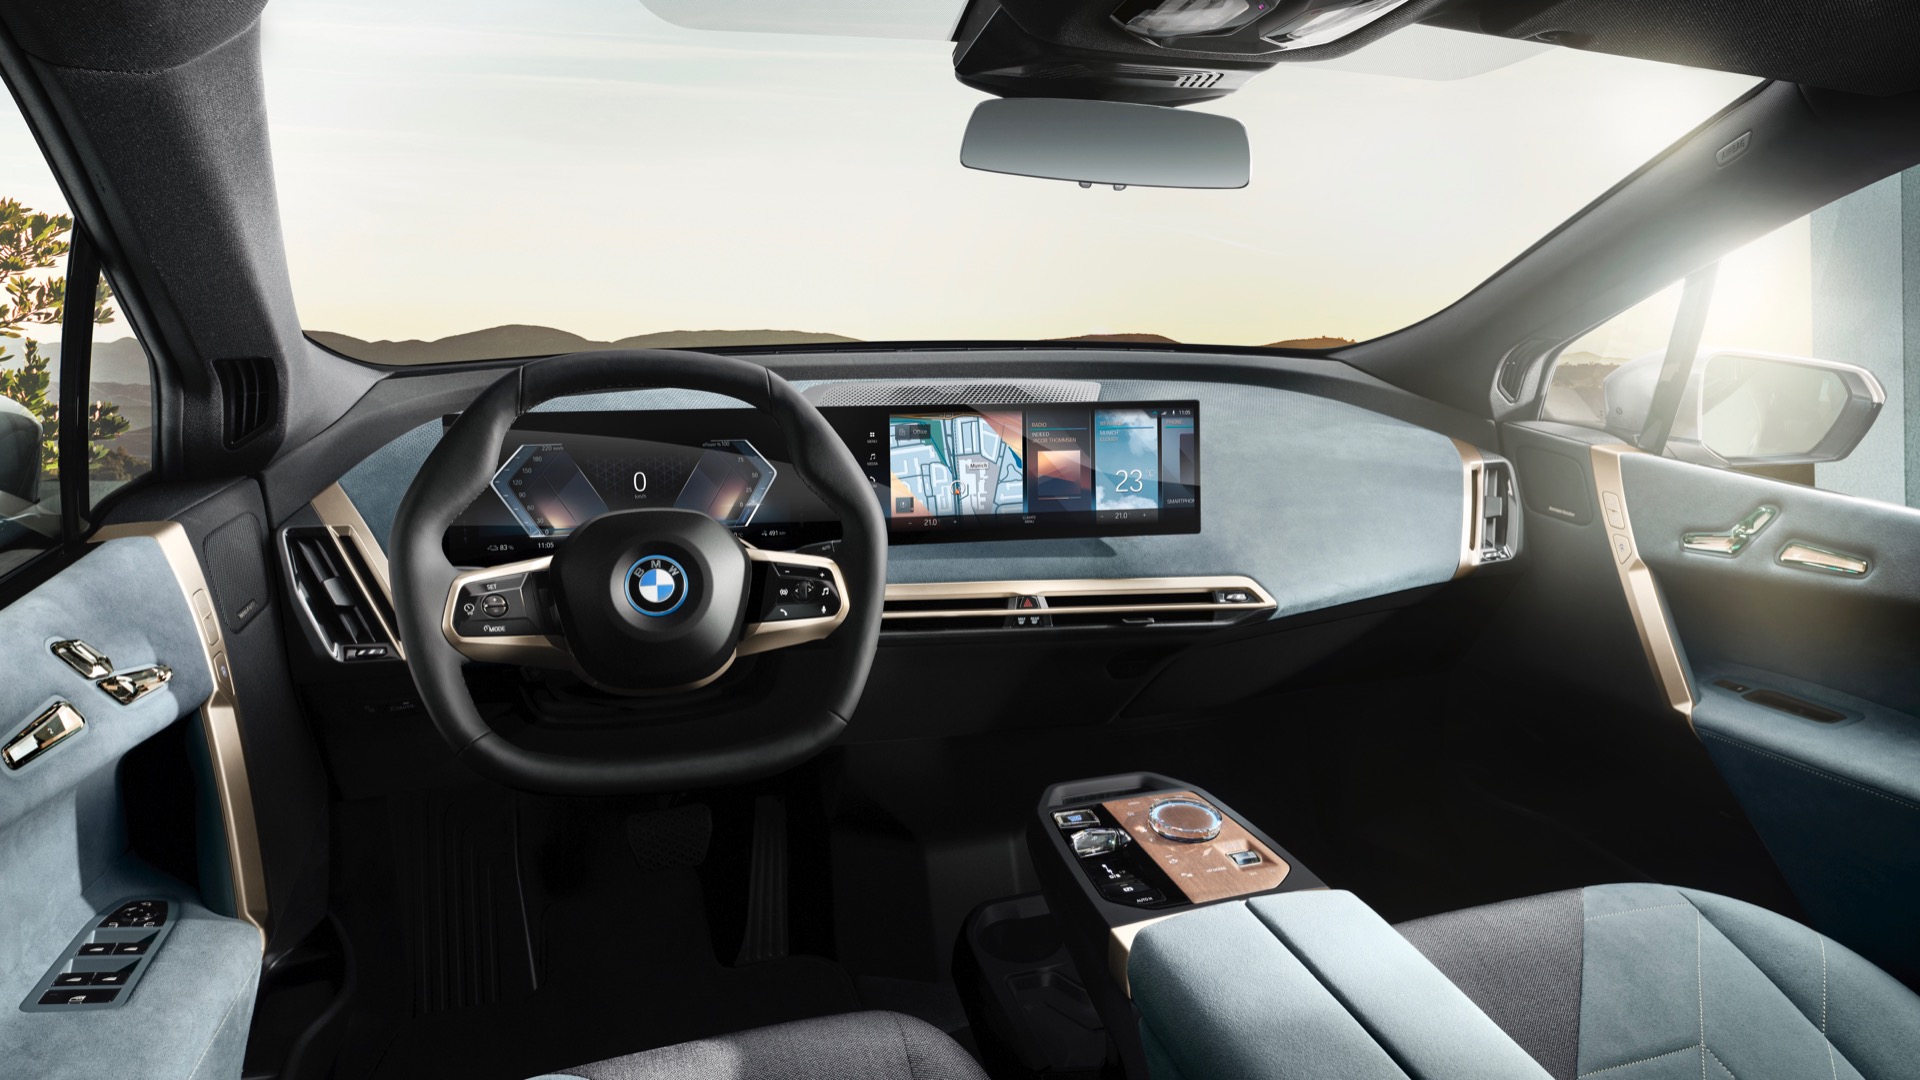 BMW iX electric SUV will offer integrated head-up display, more